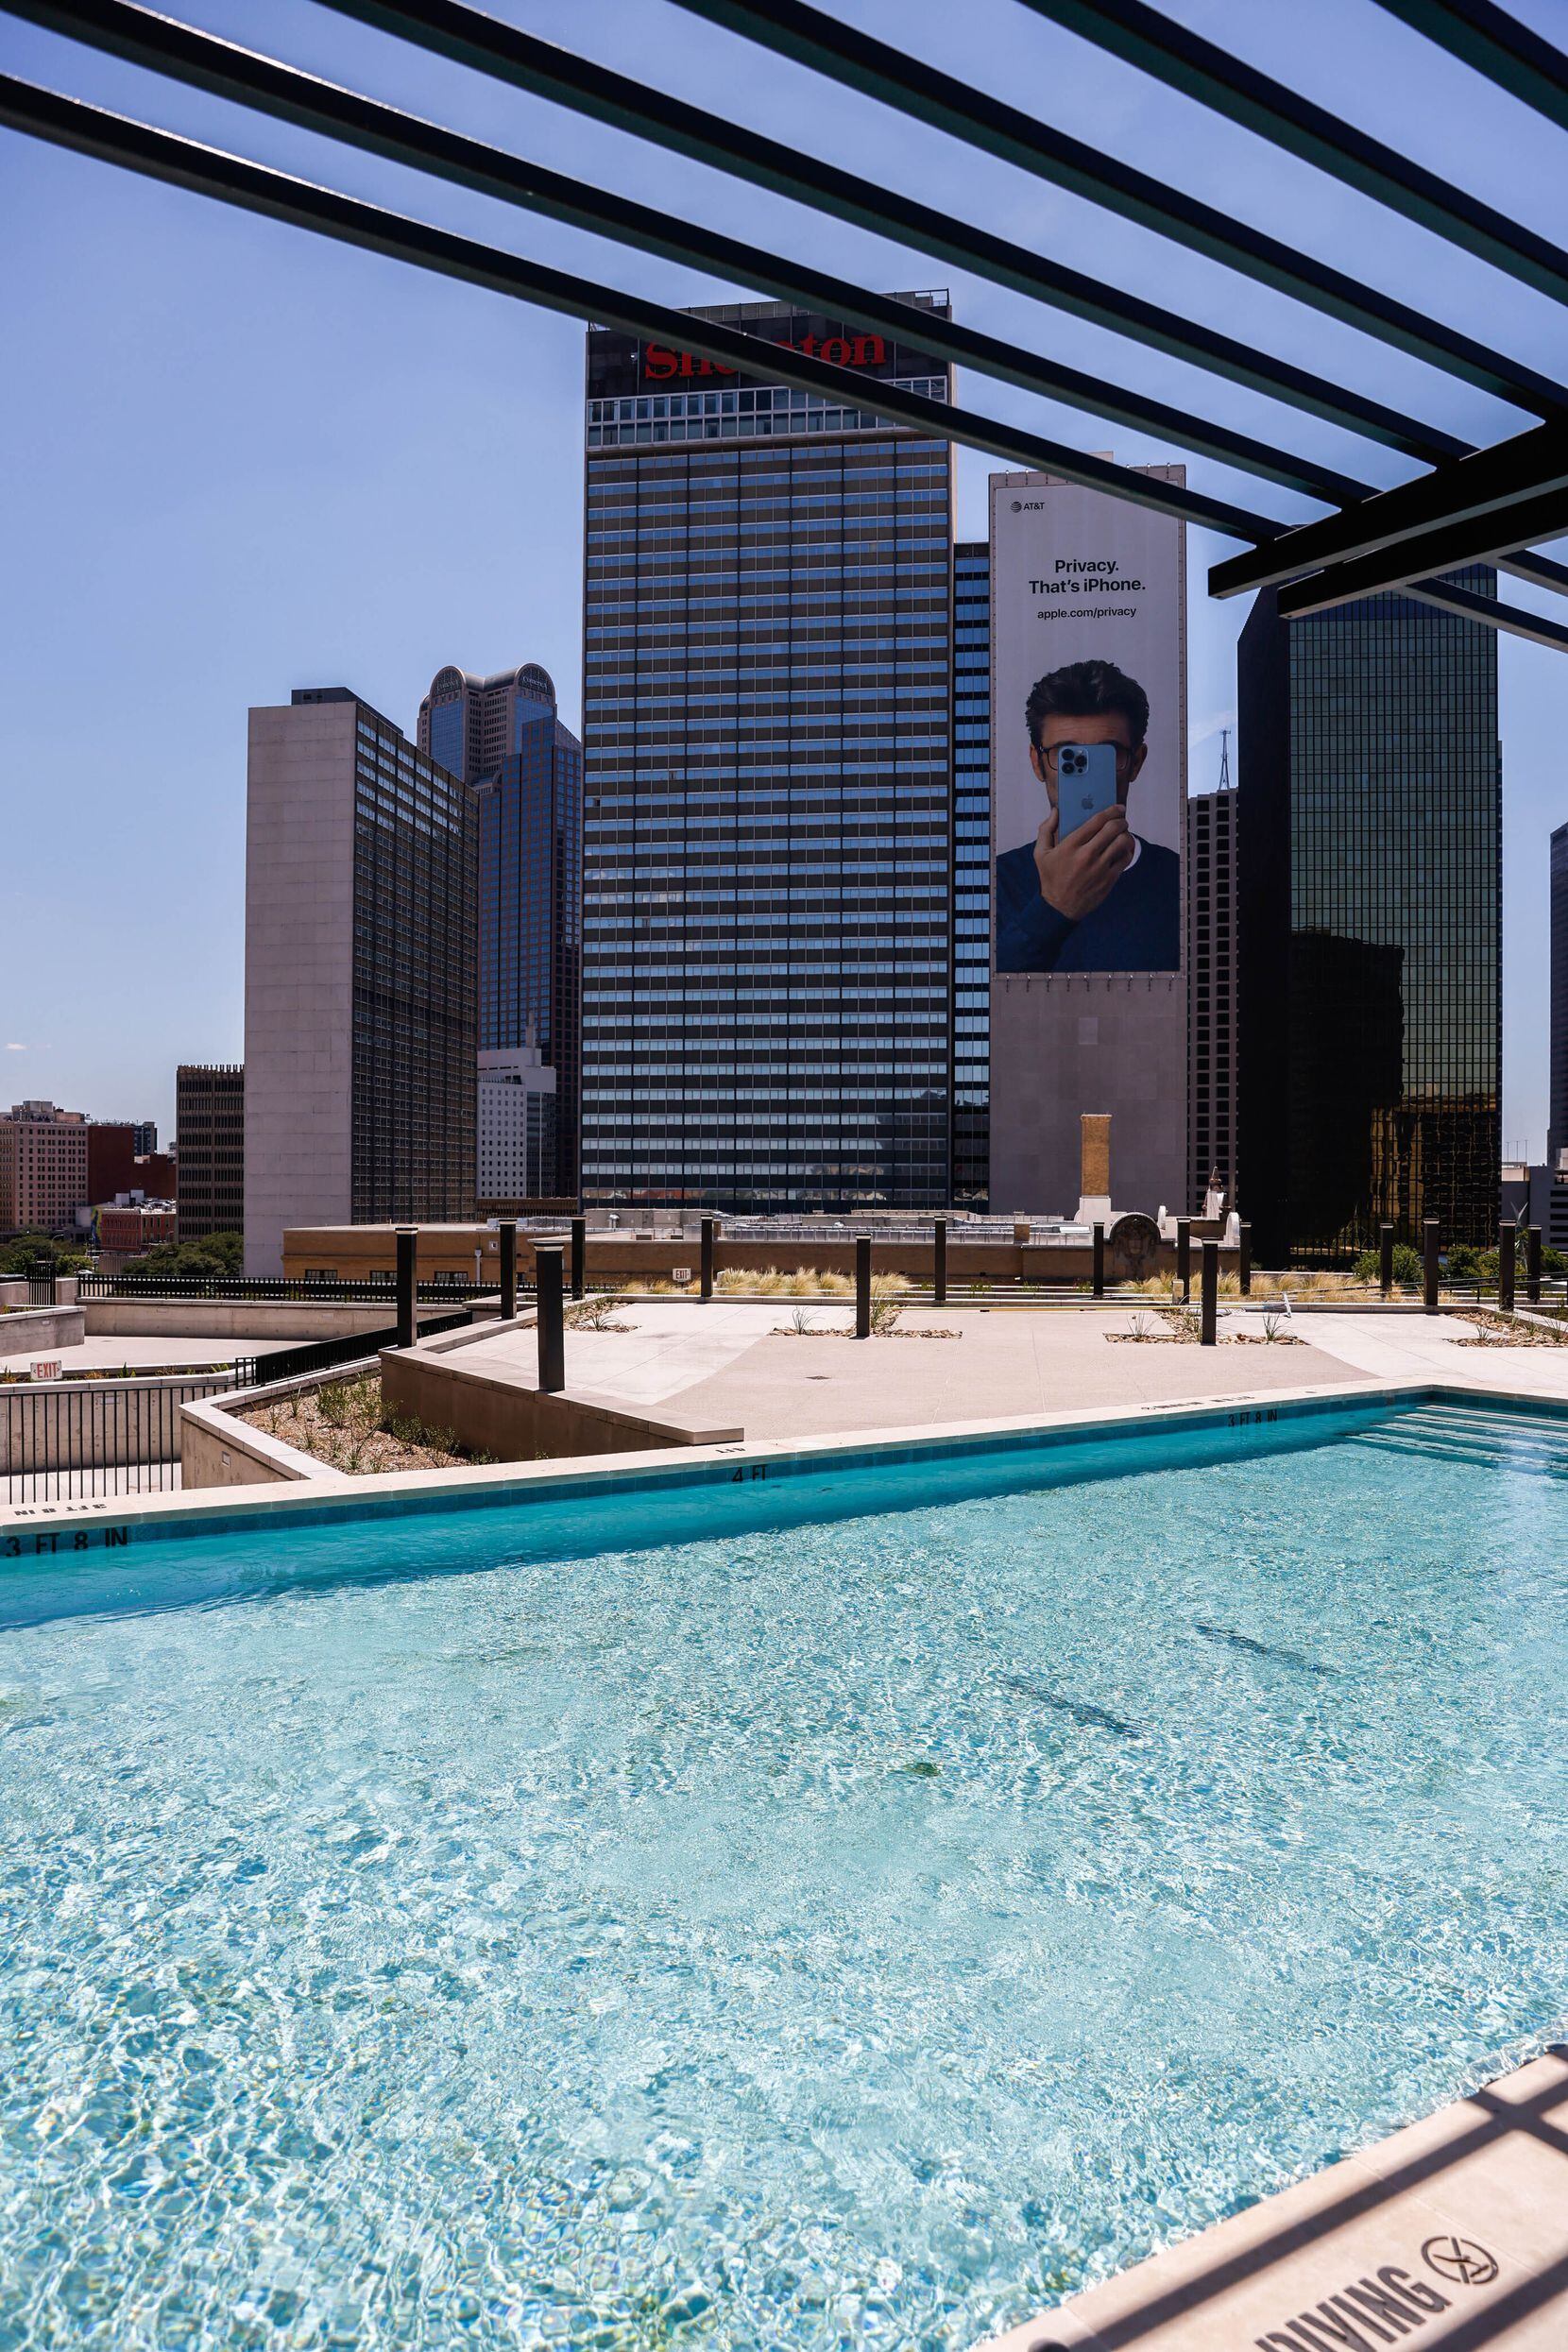 The pool area at the Galbraith apartment high-rise.